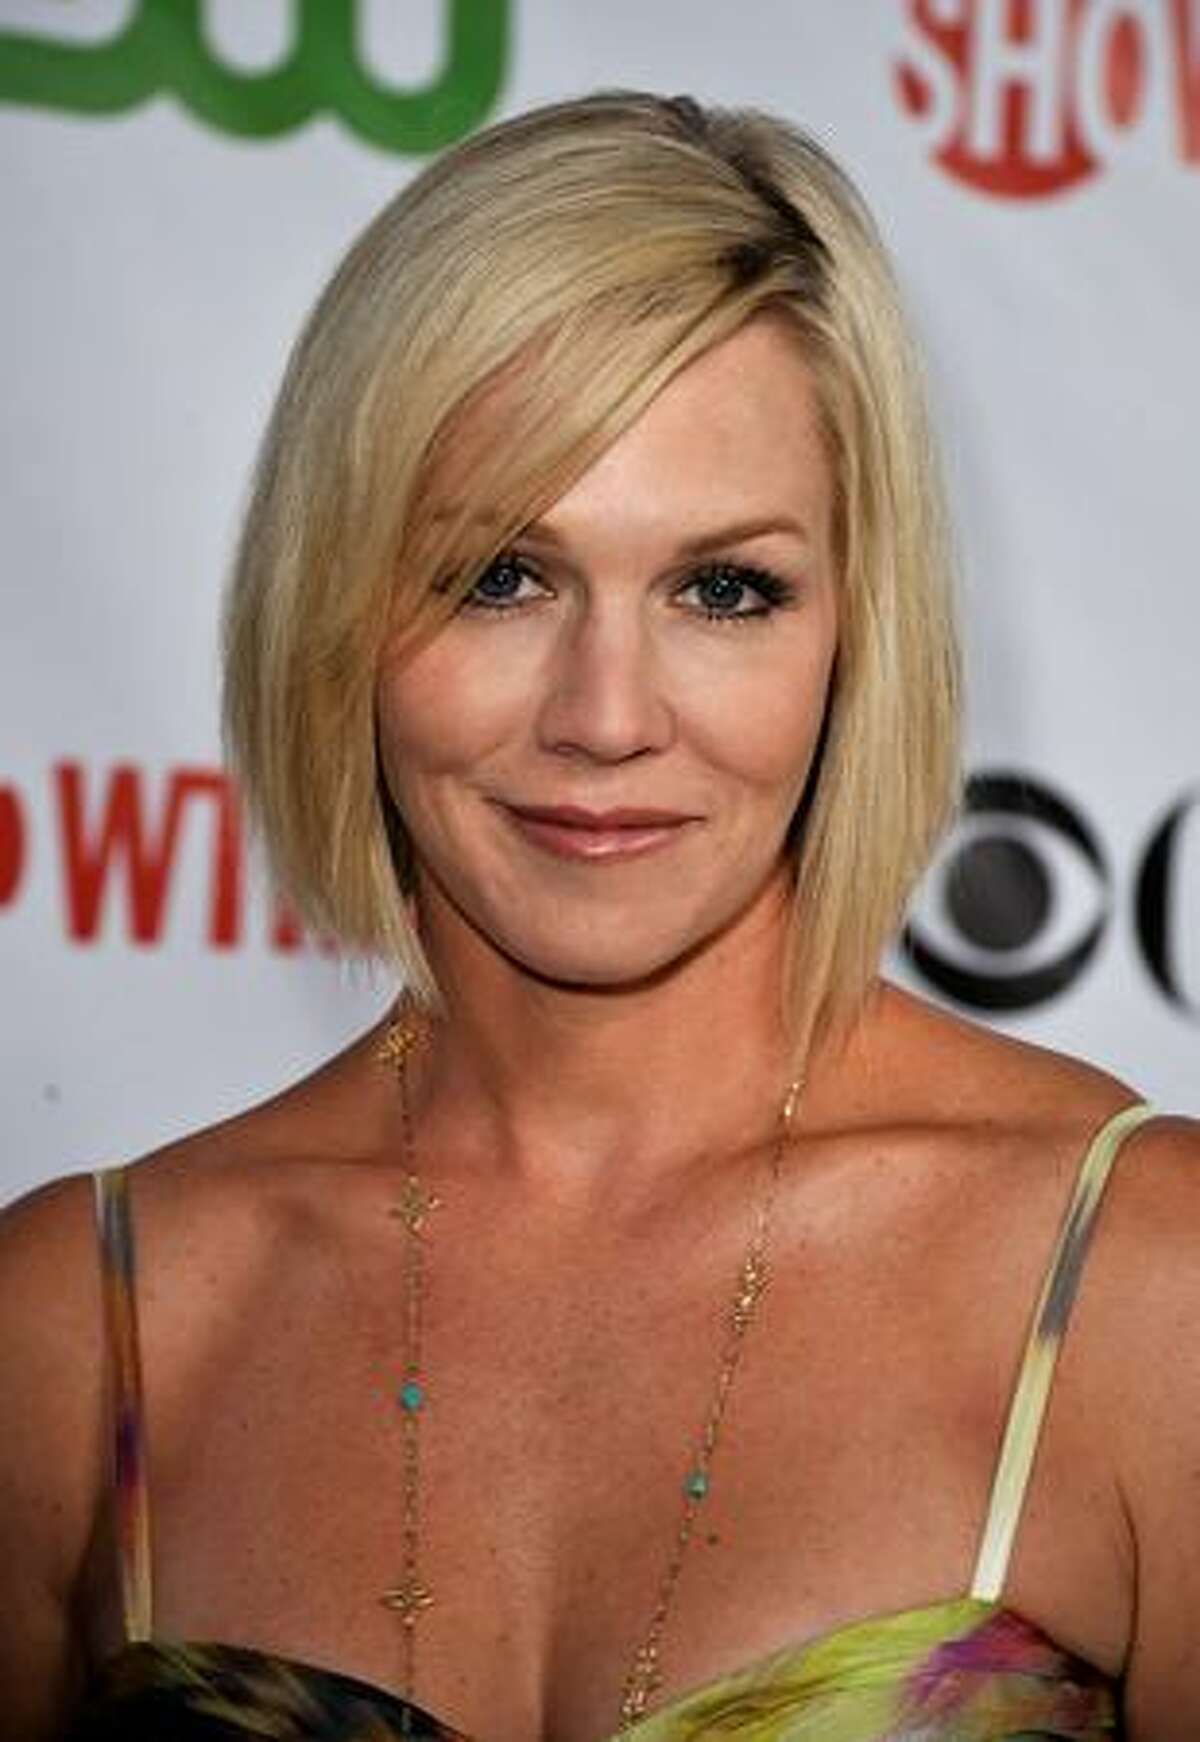 Actress Jennie Garth arrives at the CBS, CW, CBS Television Studios & Showtime TCA party held at the Huntington Library in Pasadena, California.